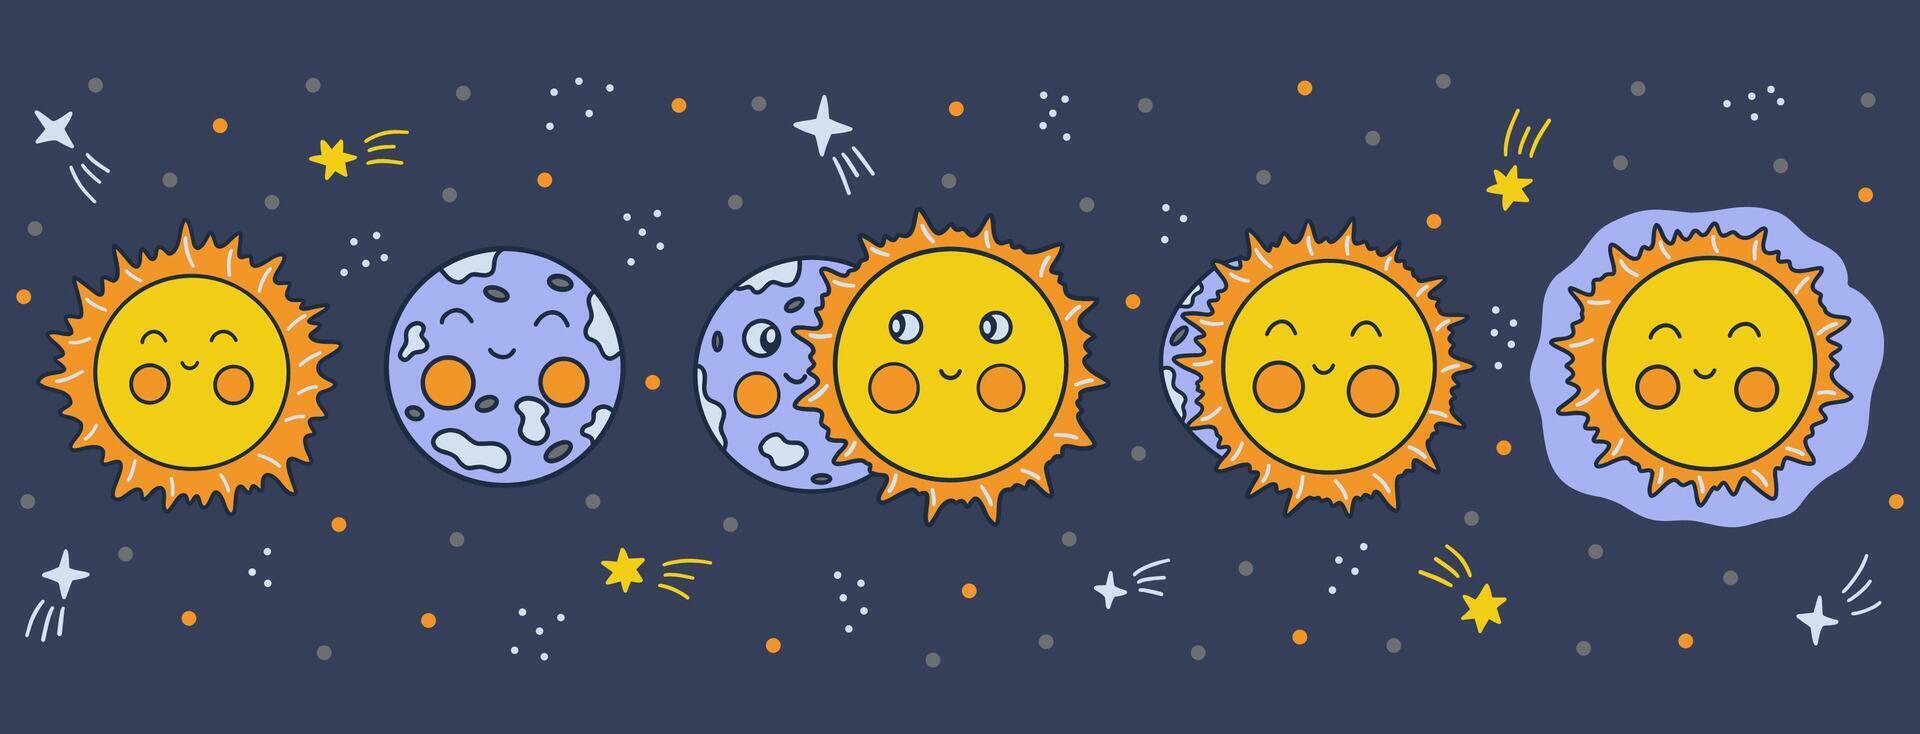 Lunar eclipse phases. Hand drawn vector, blue horizontal background vector